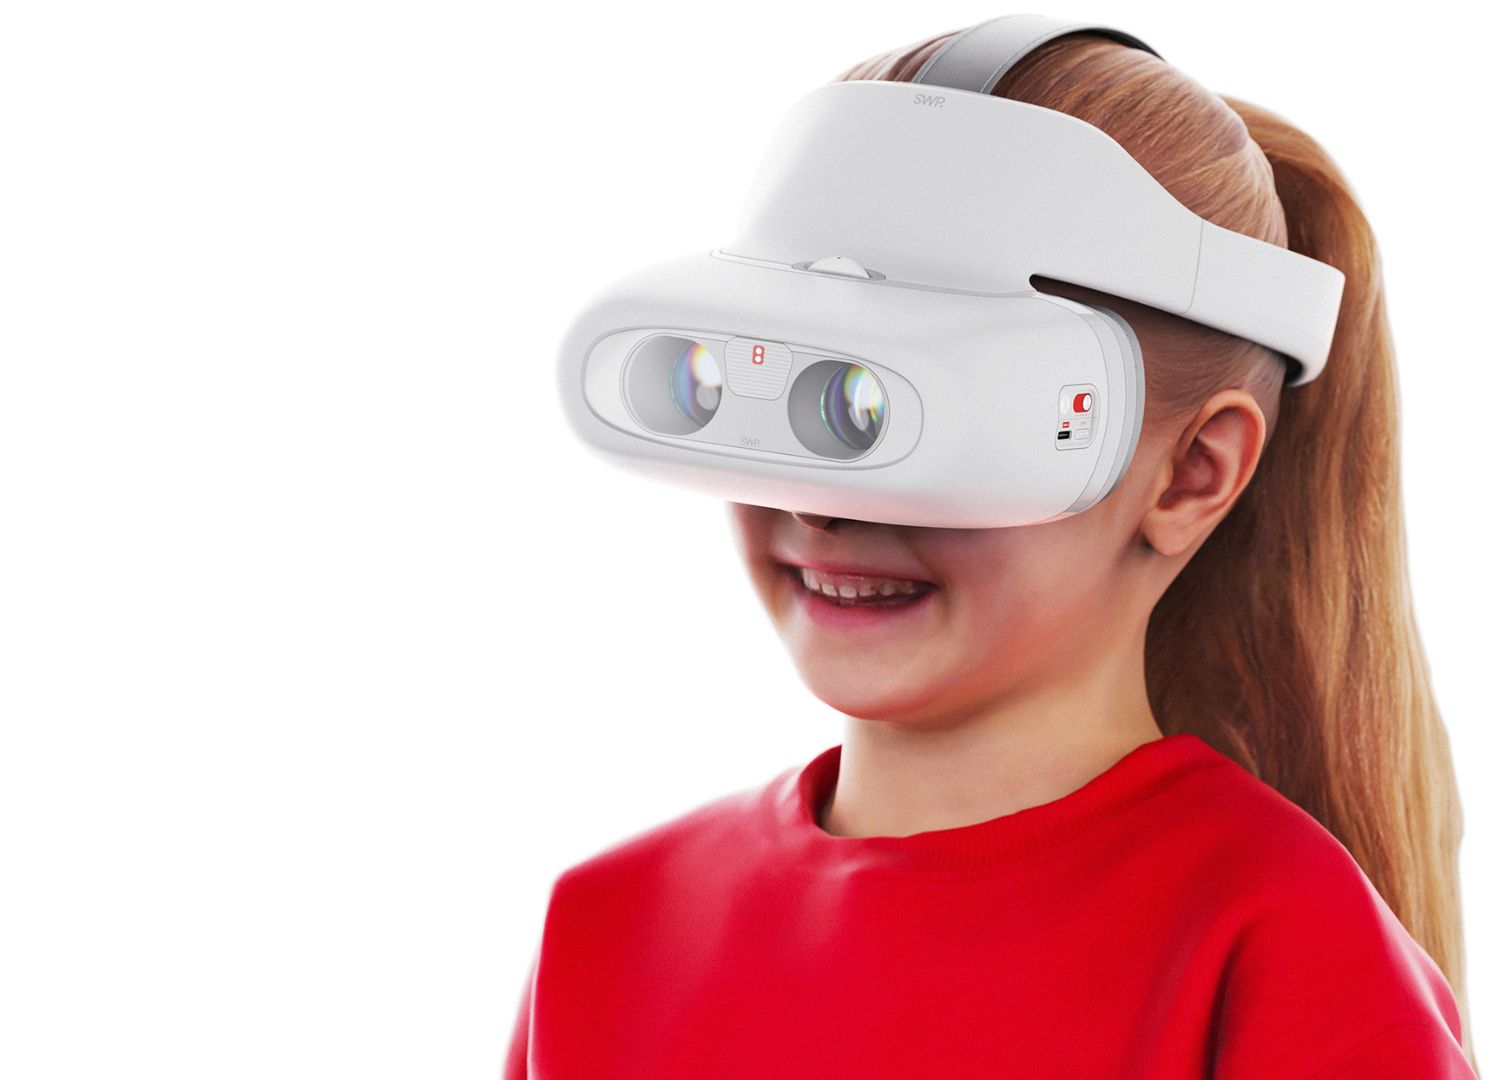 SWP strabismus cure device for kids by Haechan Ryu